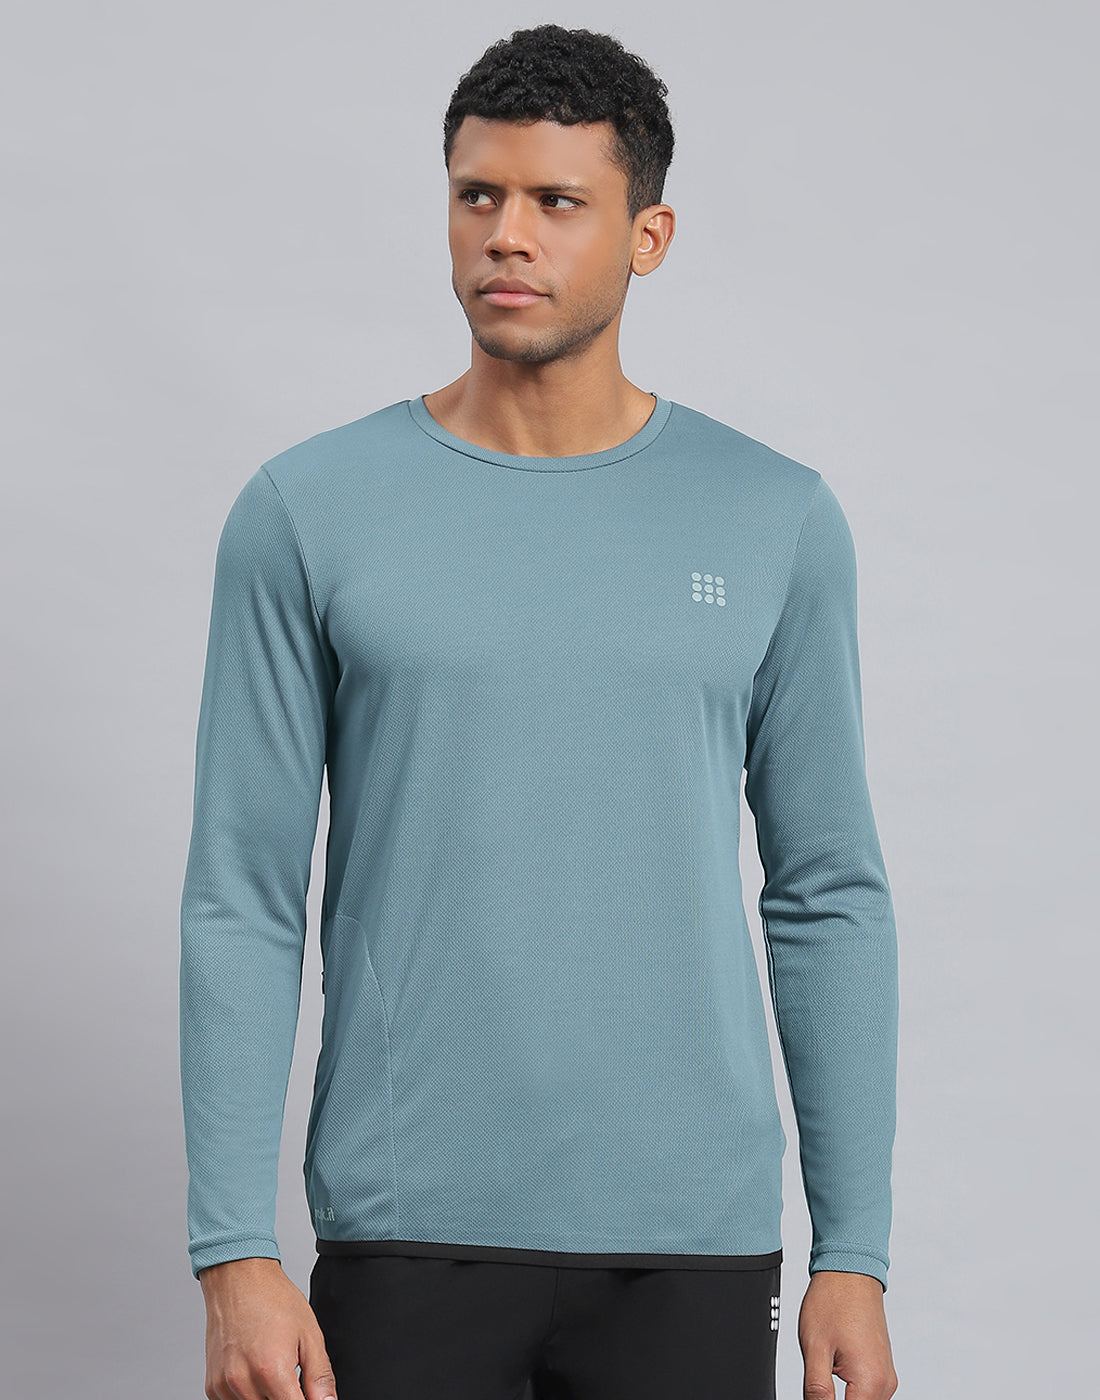 Classic Fitted Teal Perkolator T-Shirt